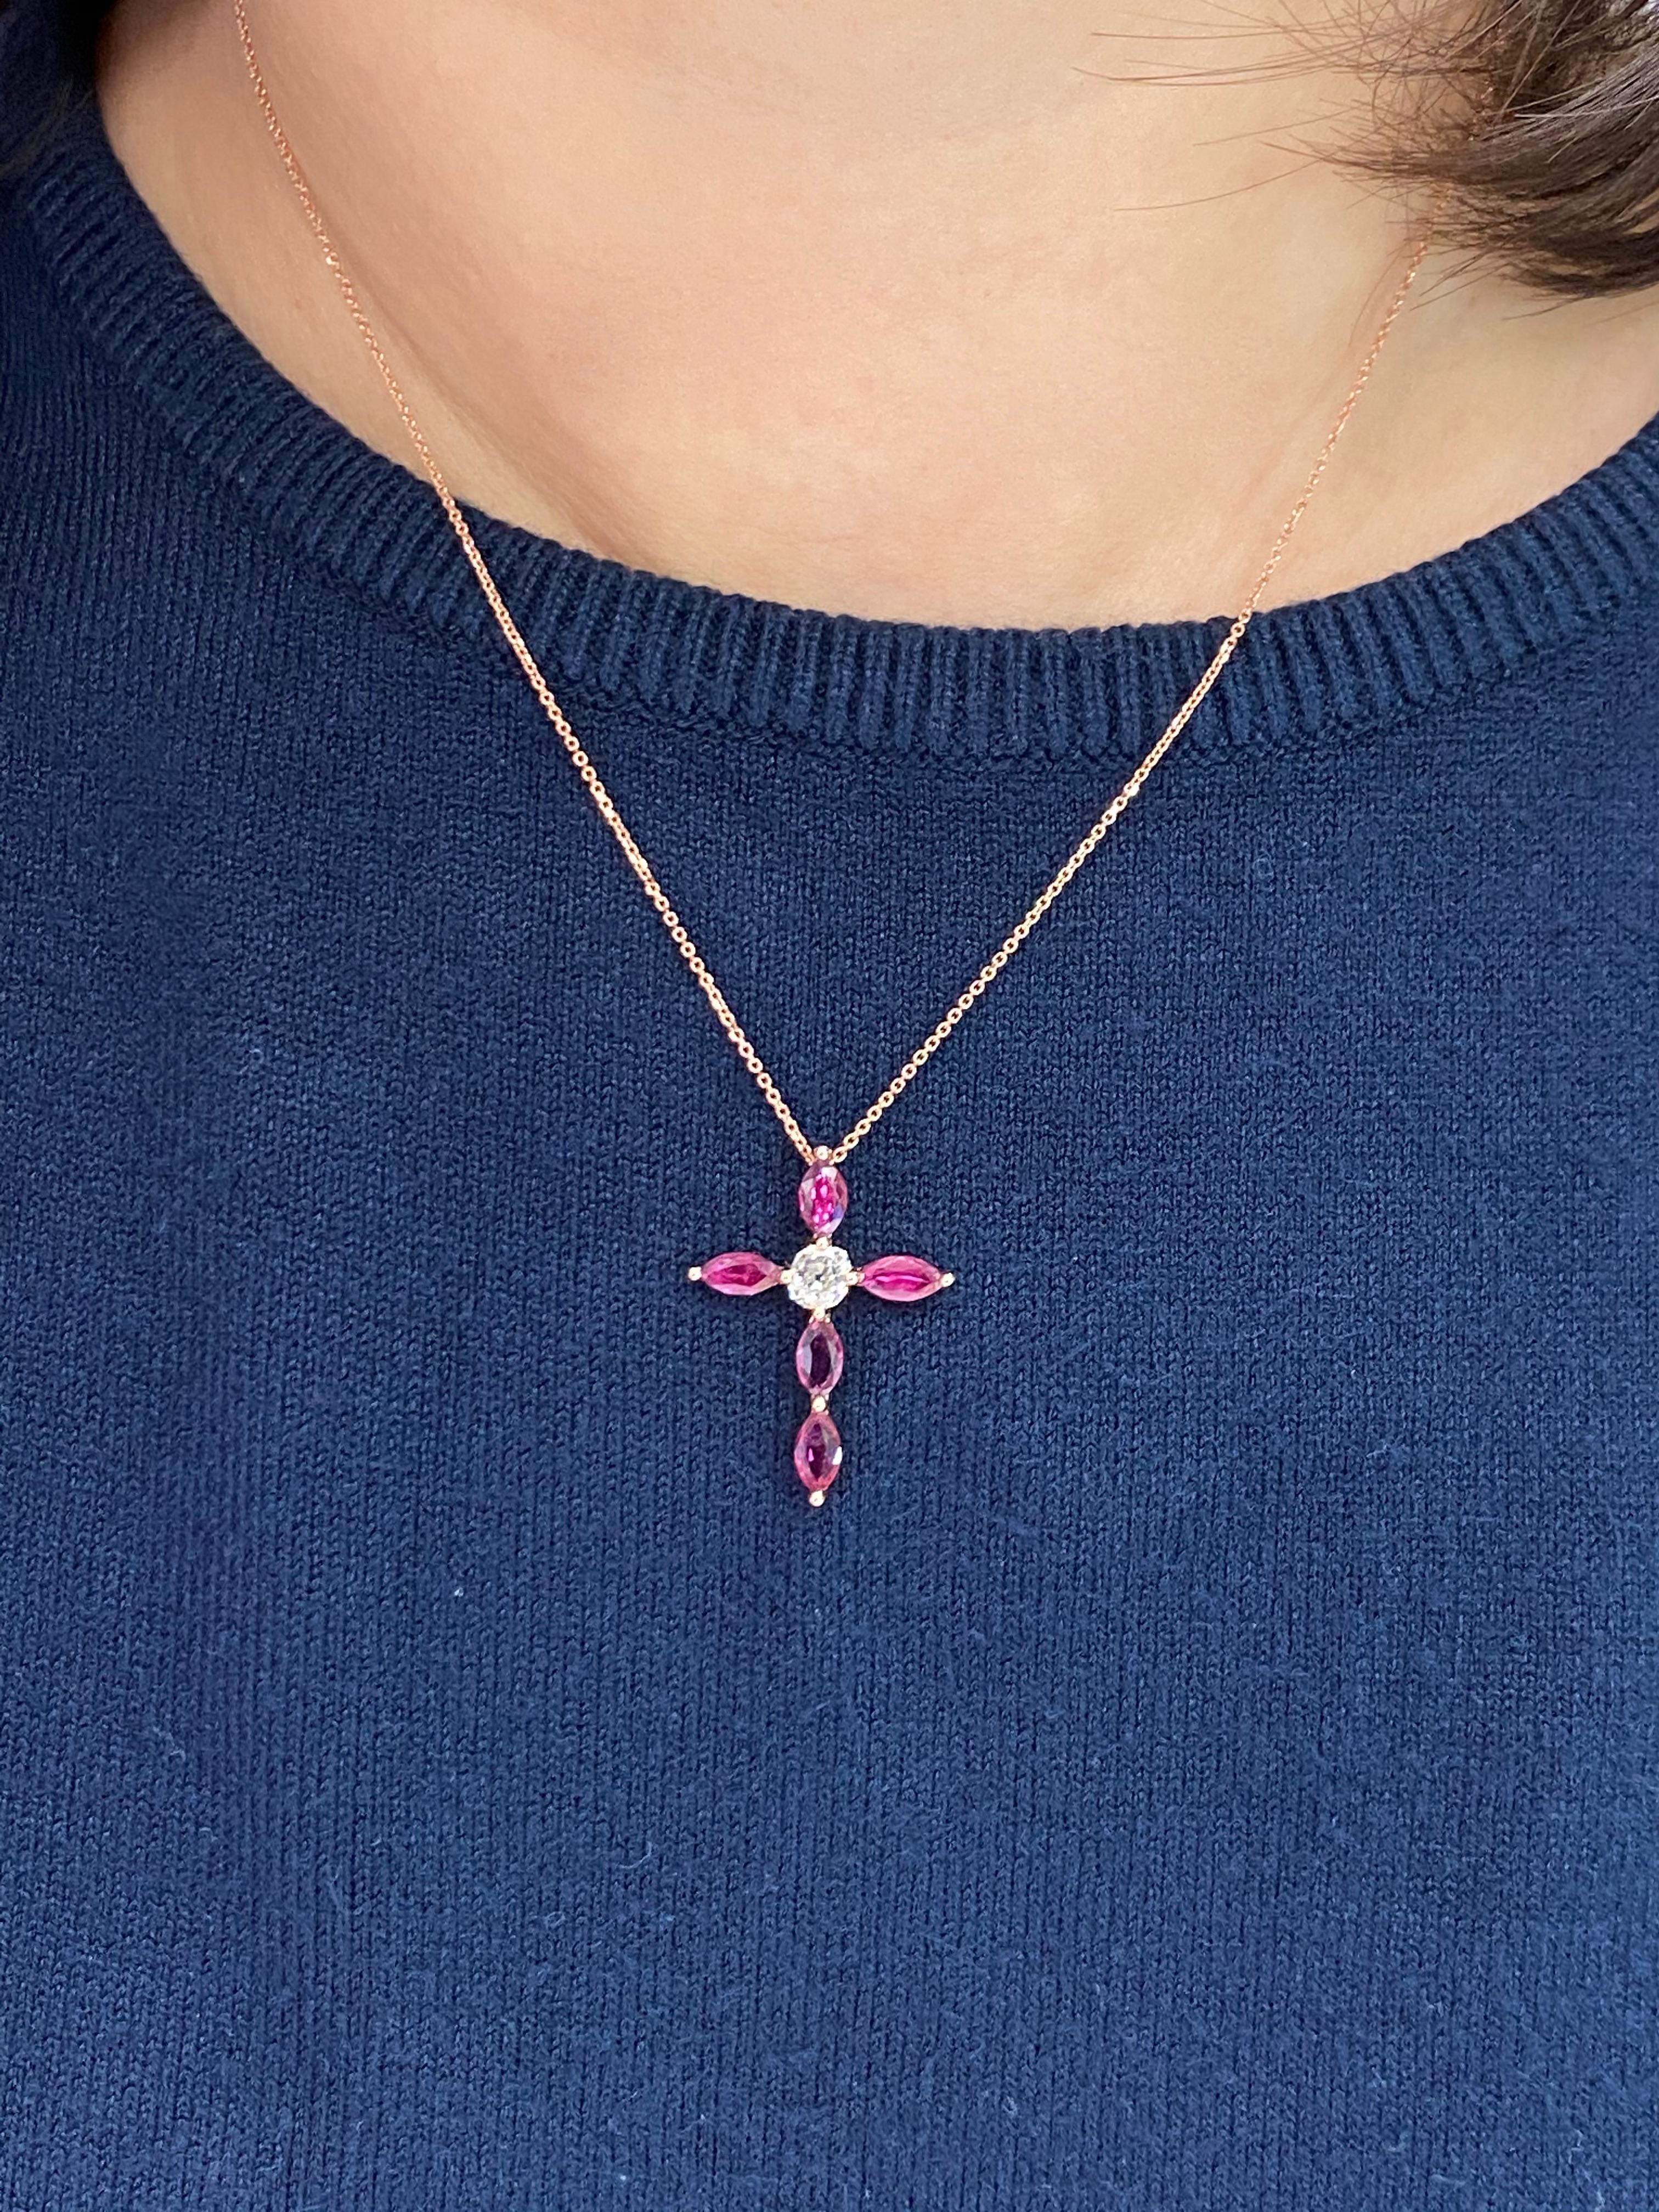 This is a beautiful classic cross pendant. It is set in 18k Rose gold and one true antique old mine cut diamond. In the center is one antique OMC diamond 0.35 cts. There are 5 Marquis shaped Burma rubies with a total carat weight of 1.53cts that